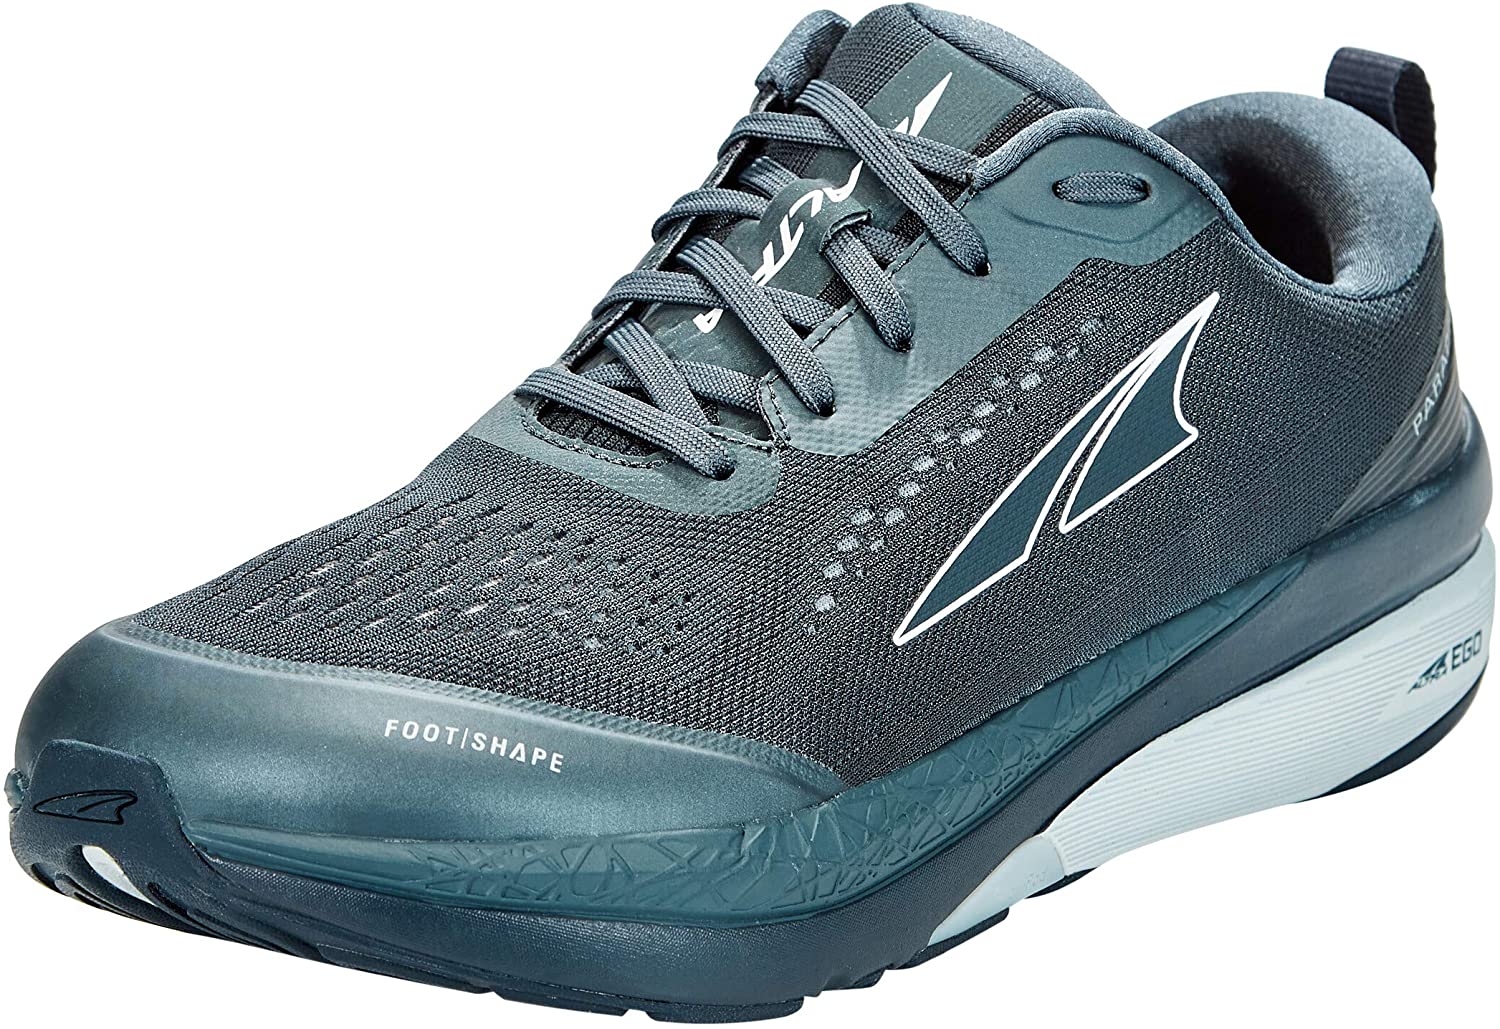 Altra Men's Paradigm 5 Road Running Shoe in Dark Blue from the side